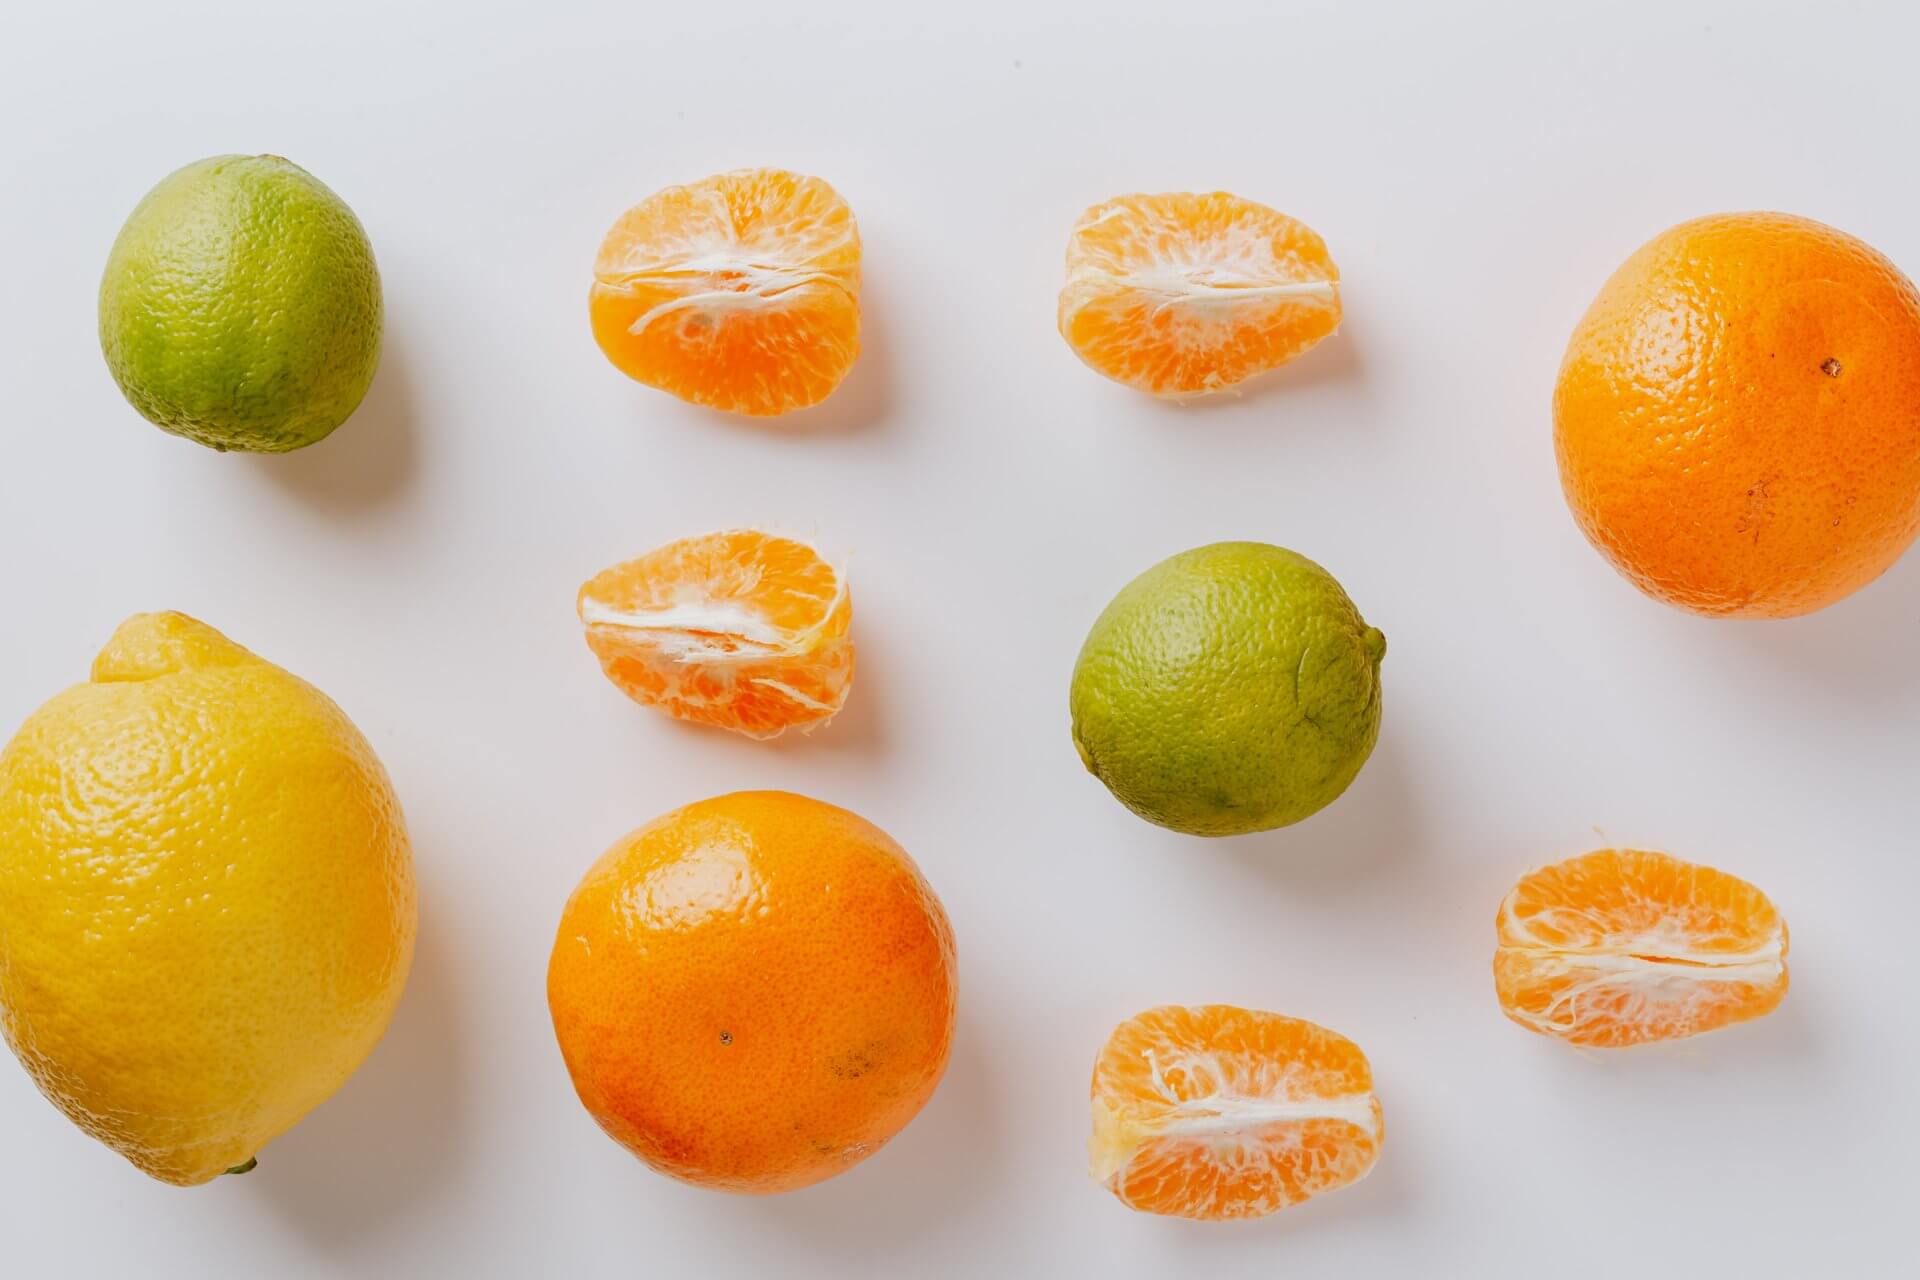 Vitamin P Found In Citrus Fruits Trialled As A Candidate Targeting COVID-19